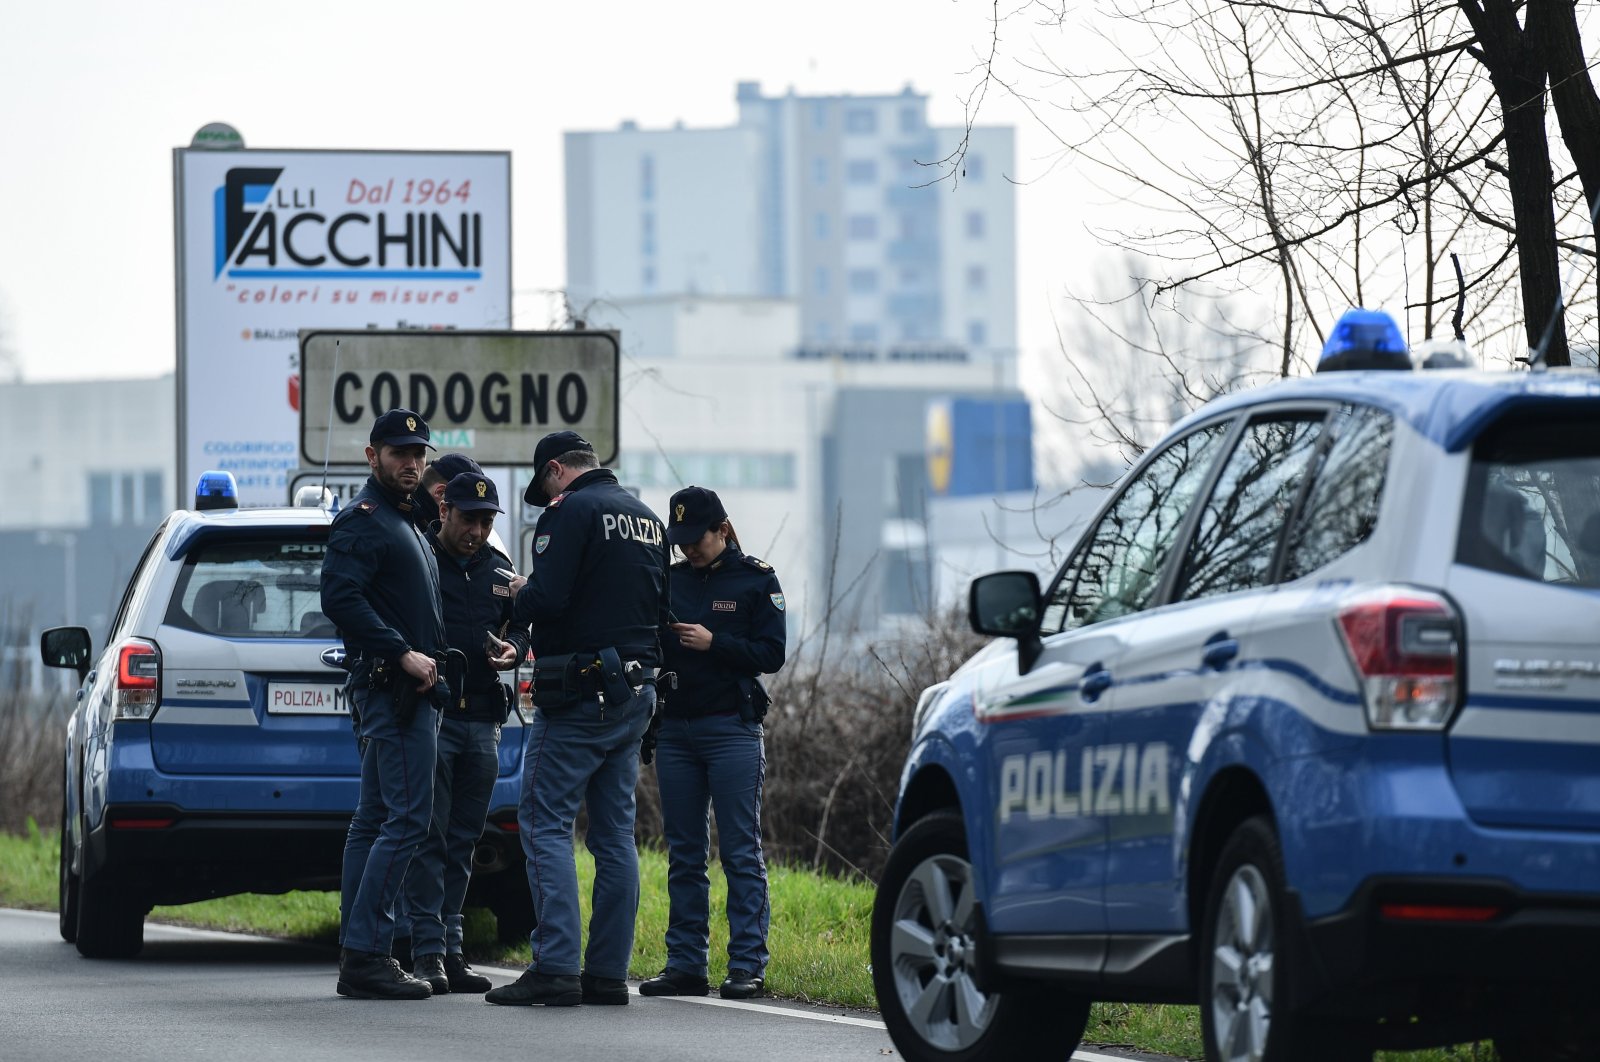 Italian National Police officers patrol at the entrance of a small town under the shadow of a new coronavirus outbreak, Codogno, Italy, Feb. 23, 2020. (AFP Photo)